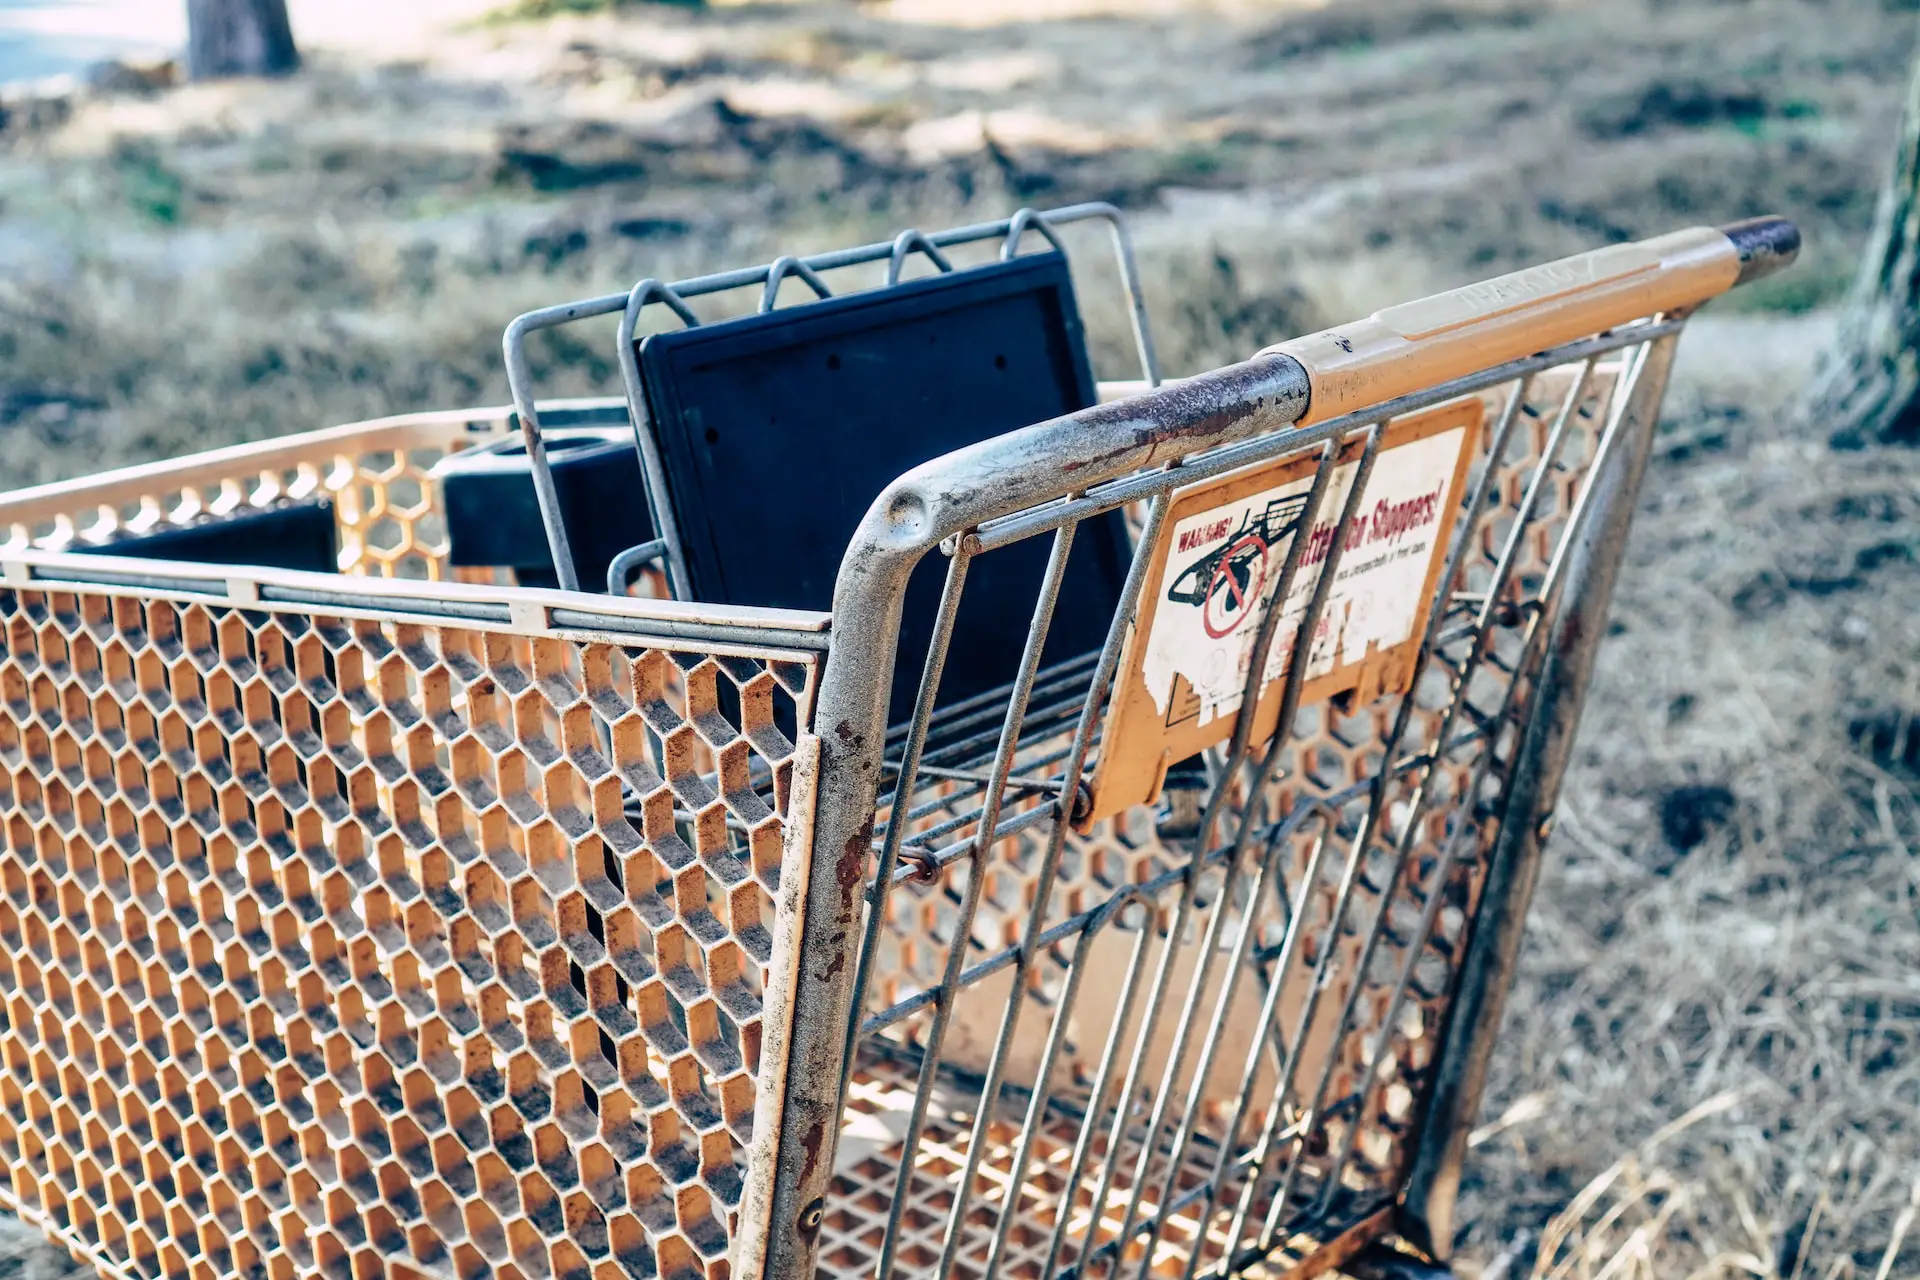 How Text Marketing and Conversational Messaging Can Help With Cart Abandonment